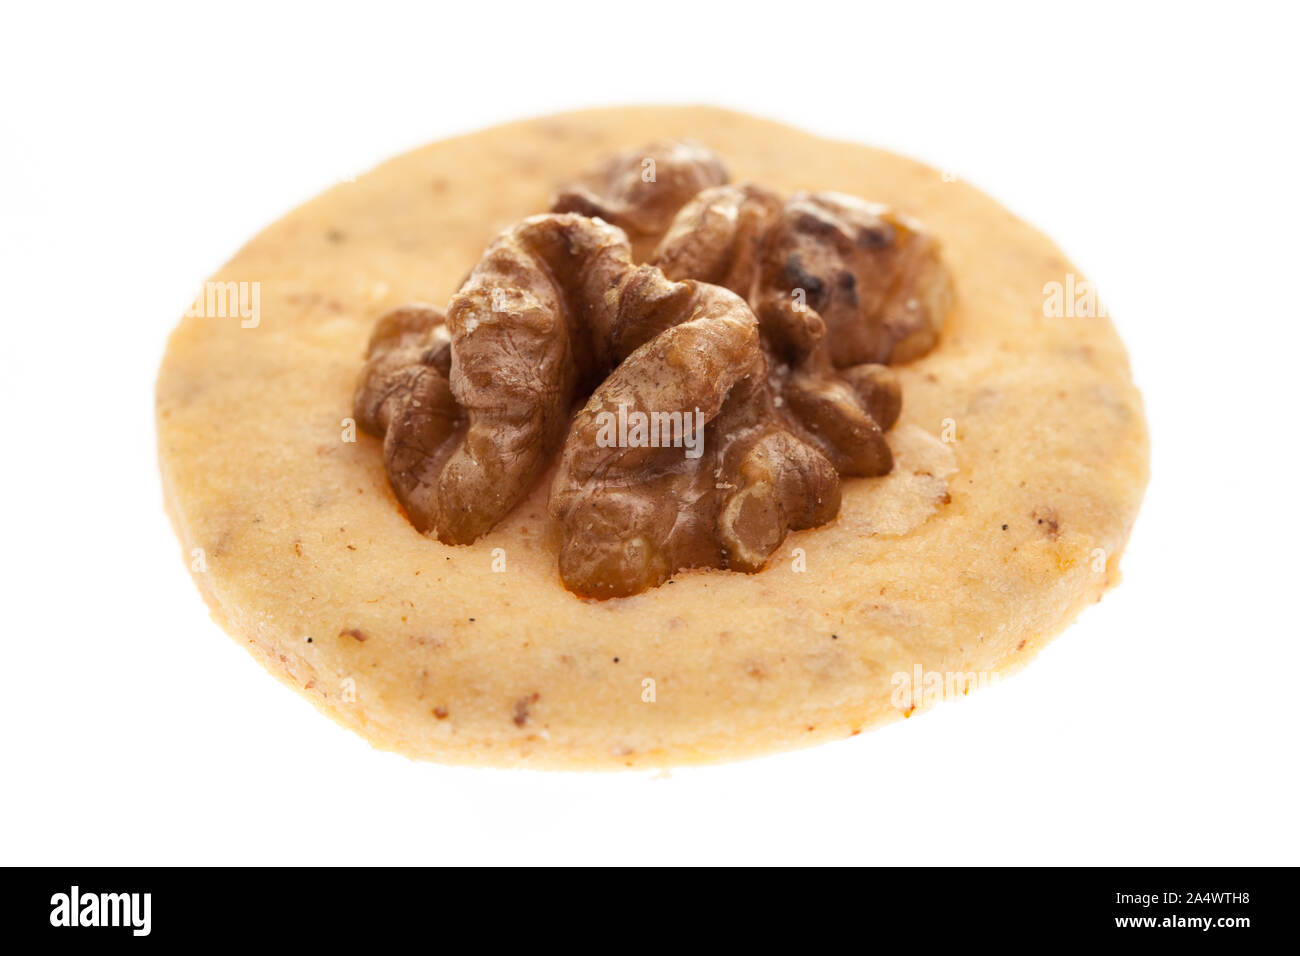 christmas cookies: Walnut Taler from the front on a white background Stock Photo